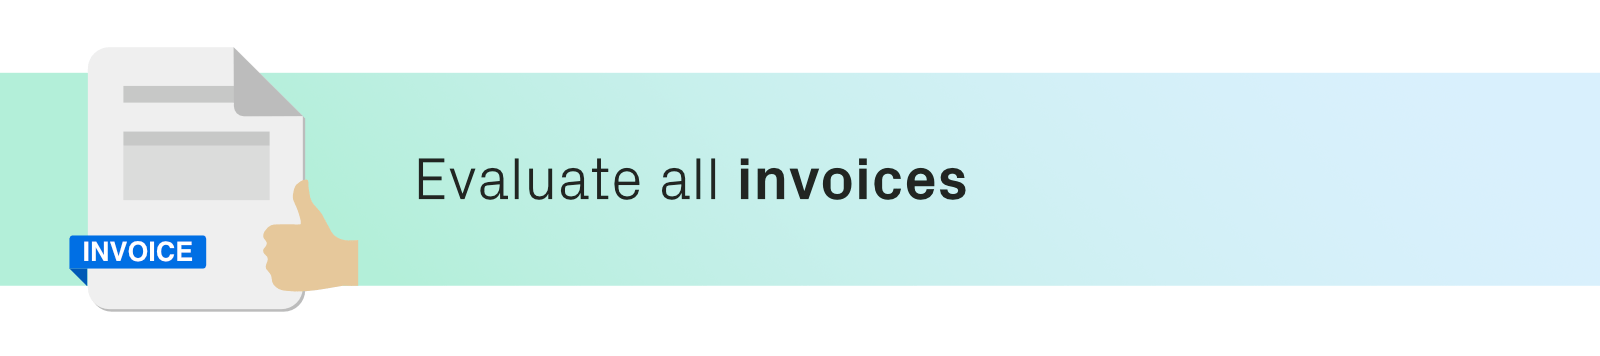 Evaluate all invoices